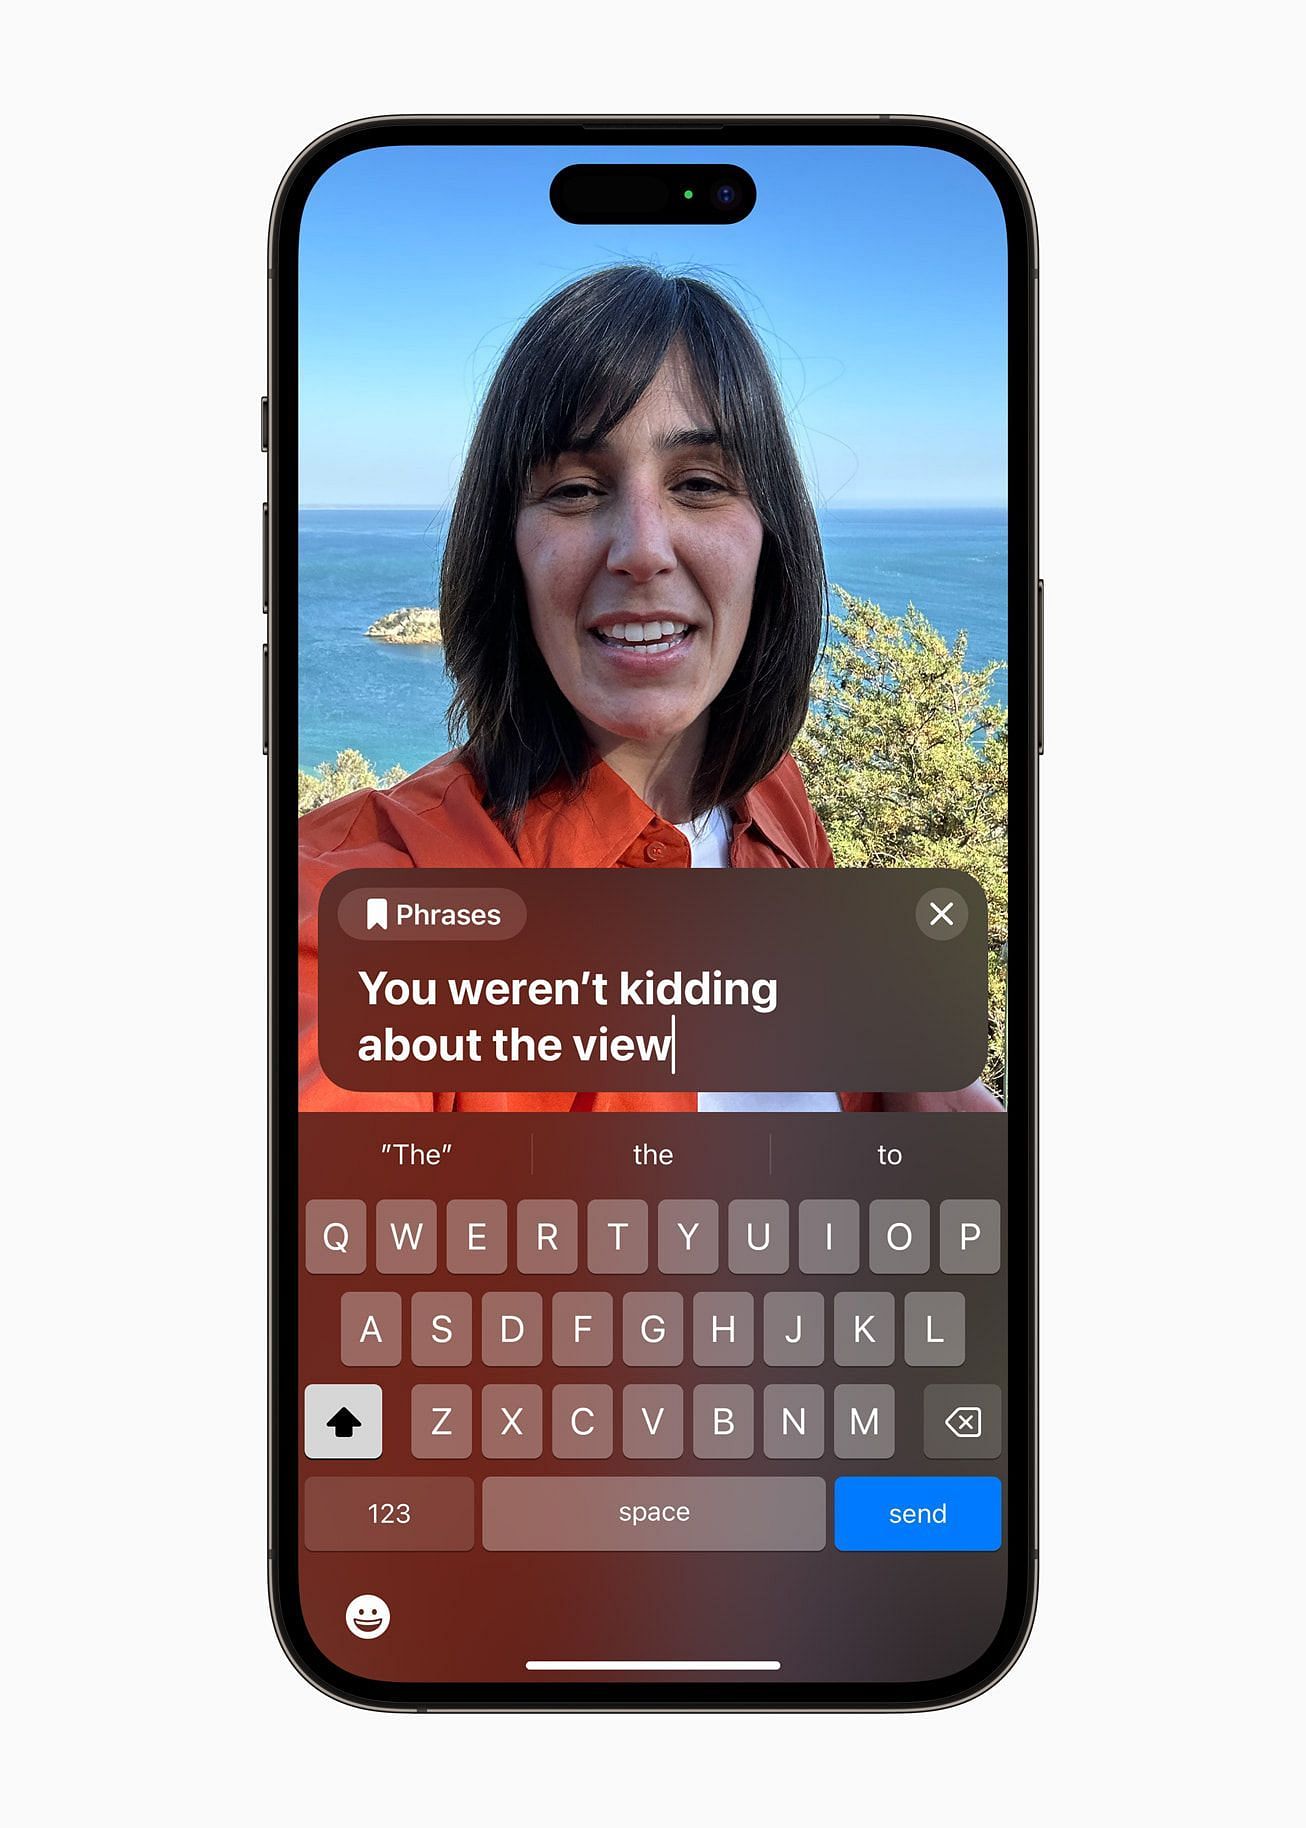 Apple Live Speech lets speech-impaired people be part of conversations. (Image via Apple)